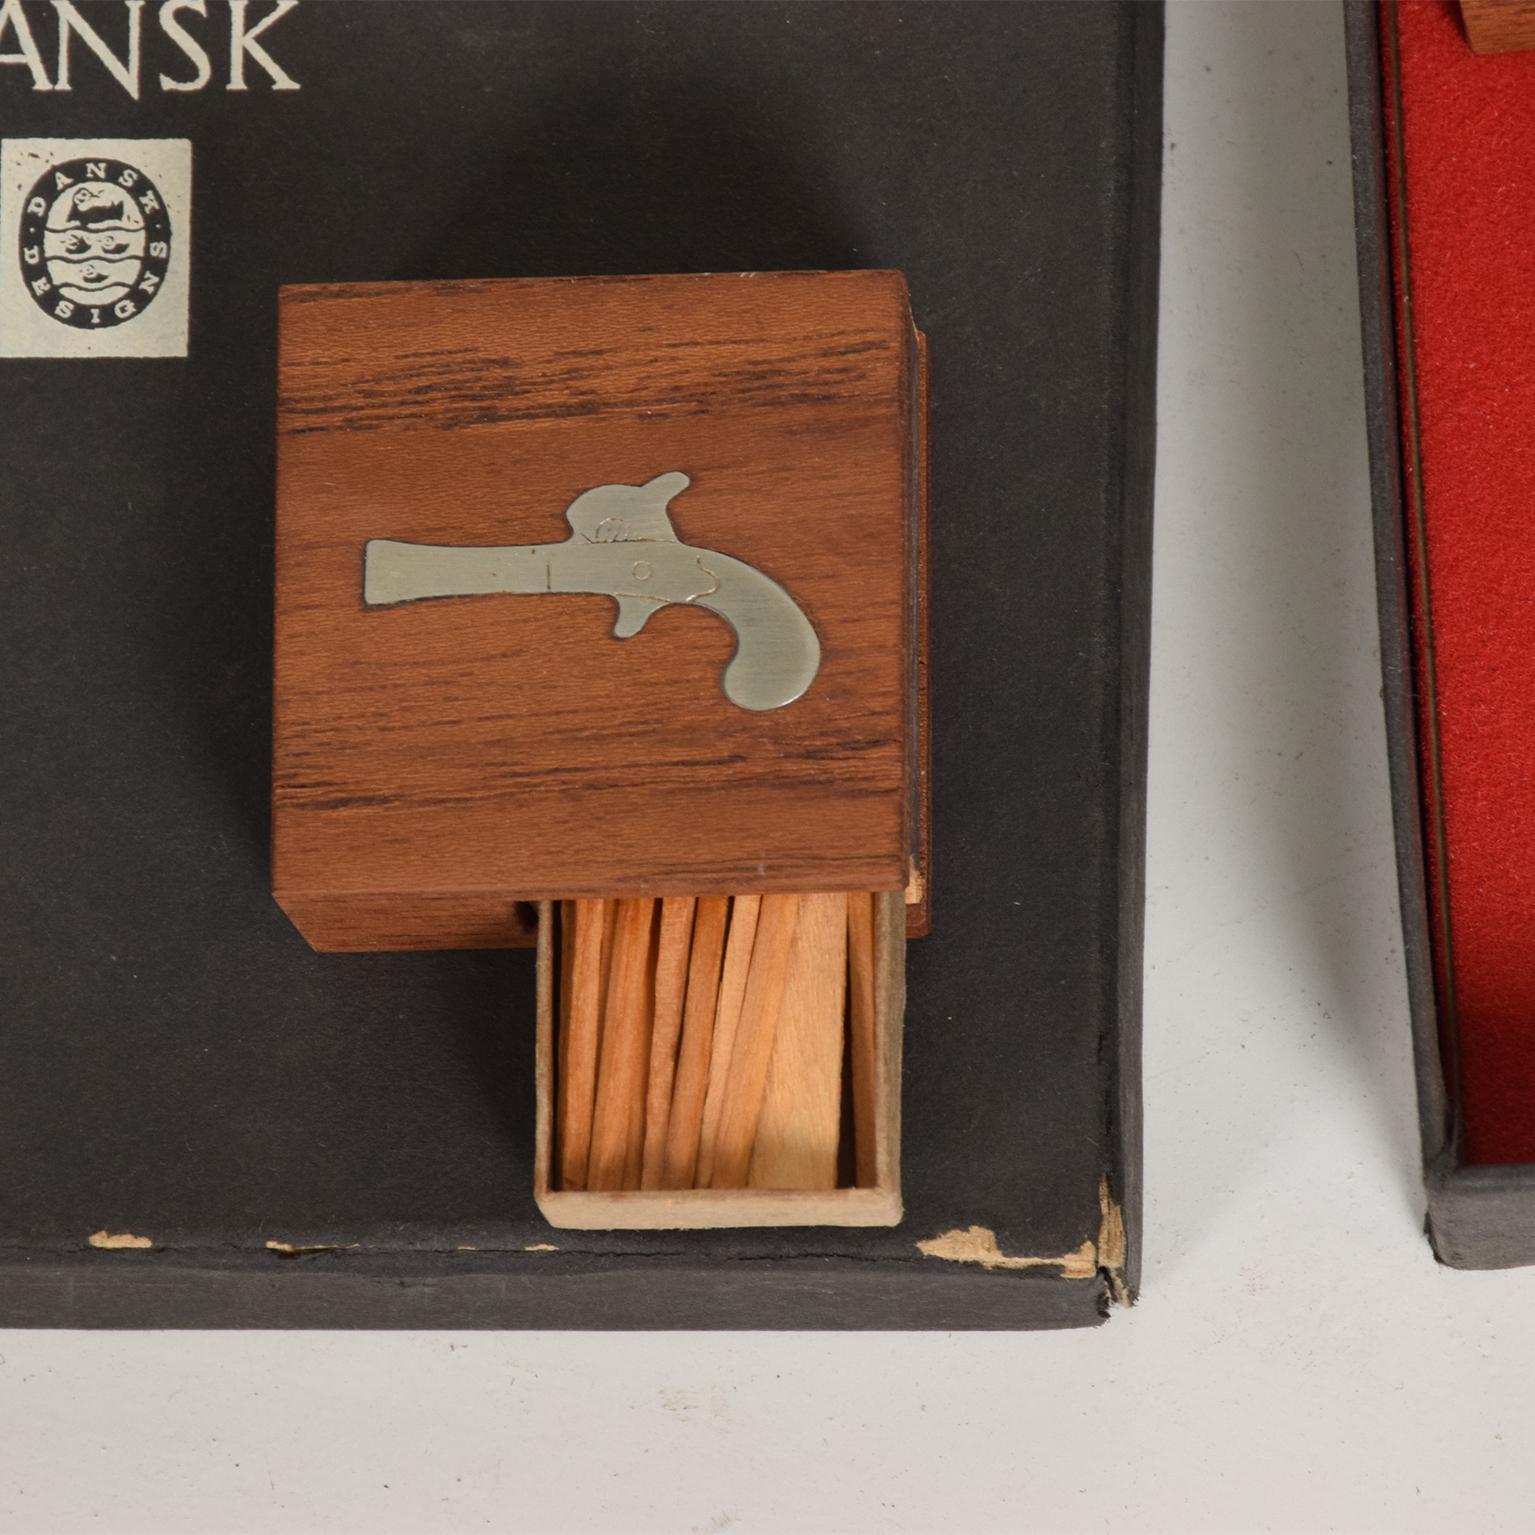 Late 20th Century Vintage Dansk Matches Boxes in Original Packaging Midcentury Danish Modern